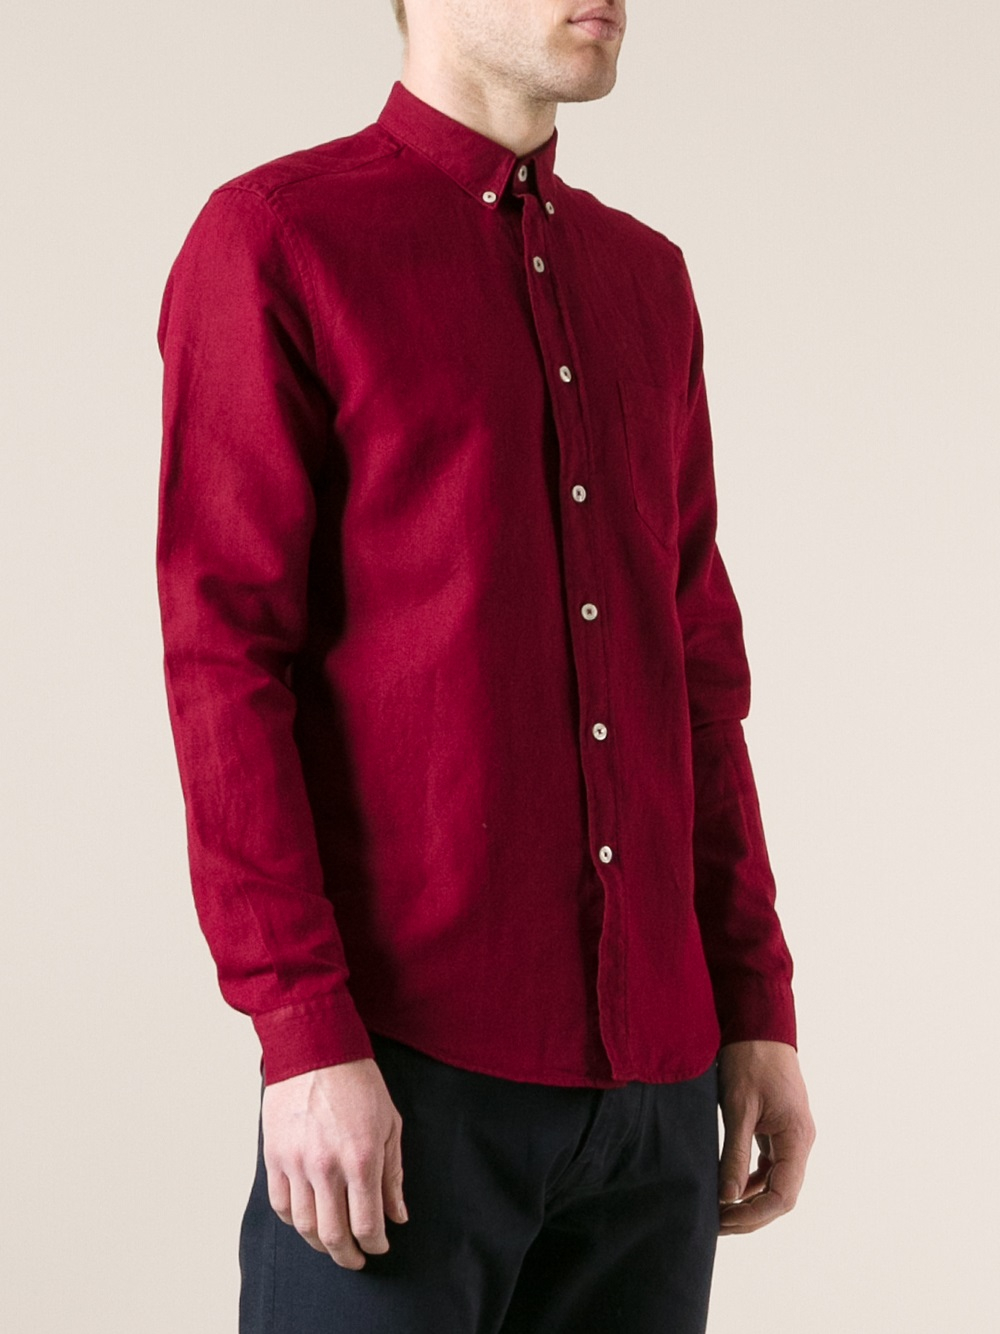 AMI Button Down Shirt in Red for Men - Lyst